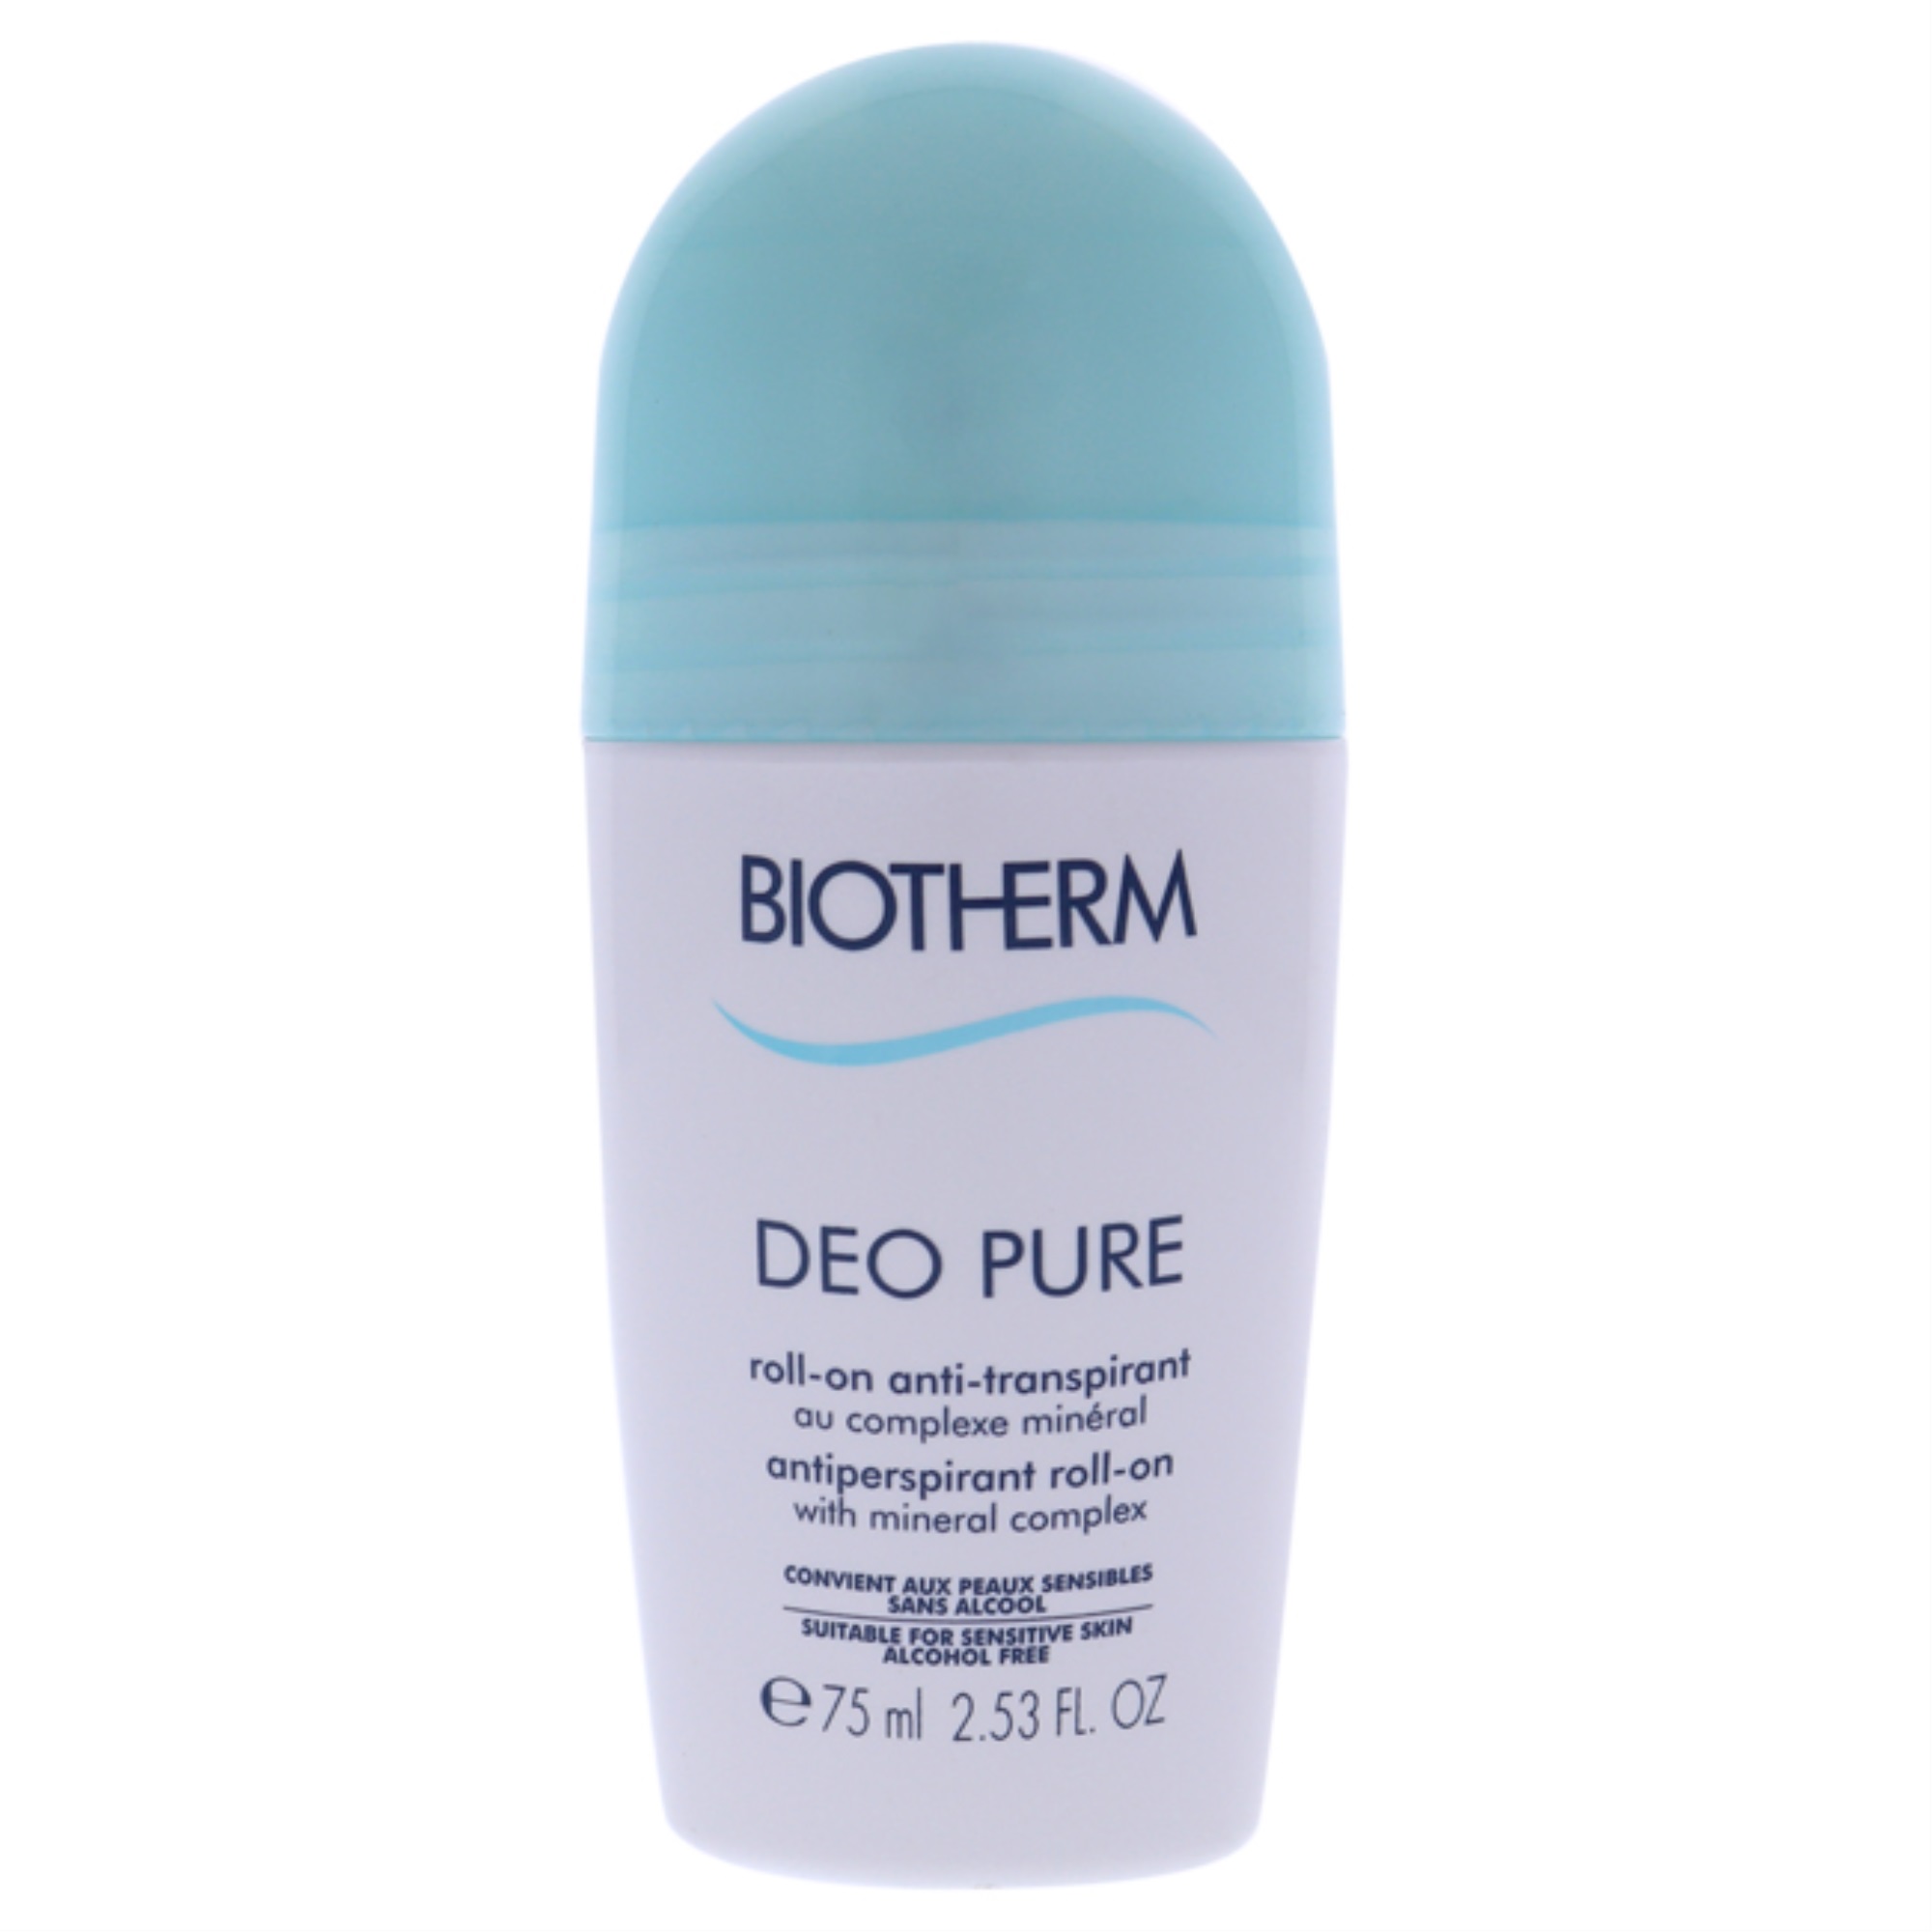 Biotherm Deo Pure Antiperspirant Roll On